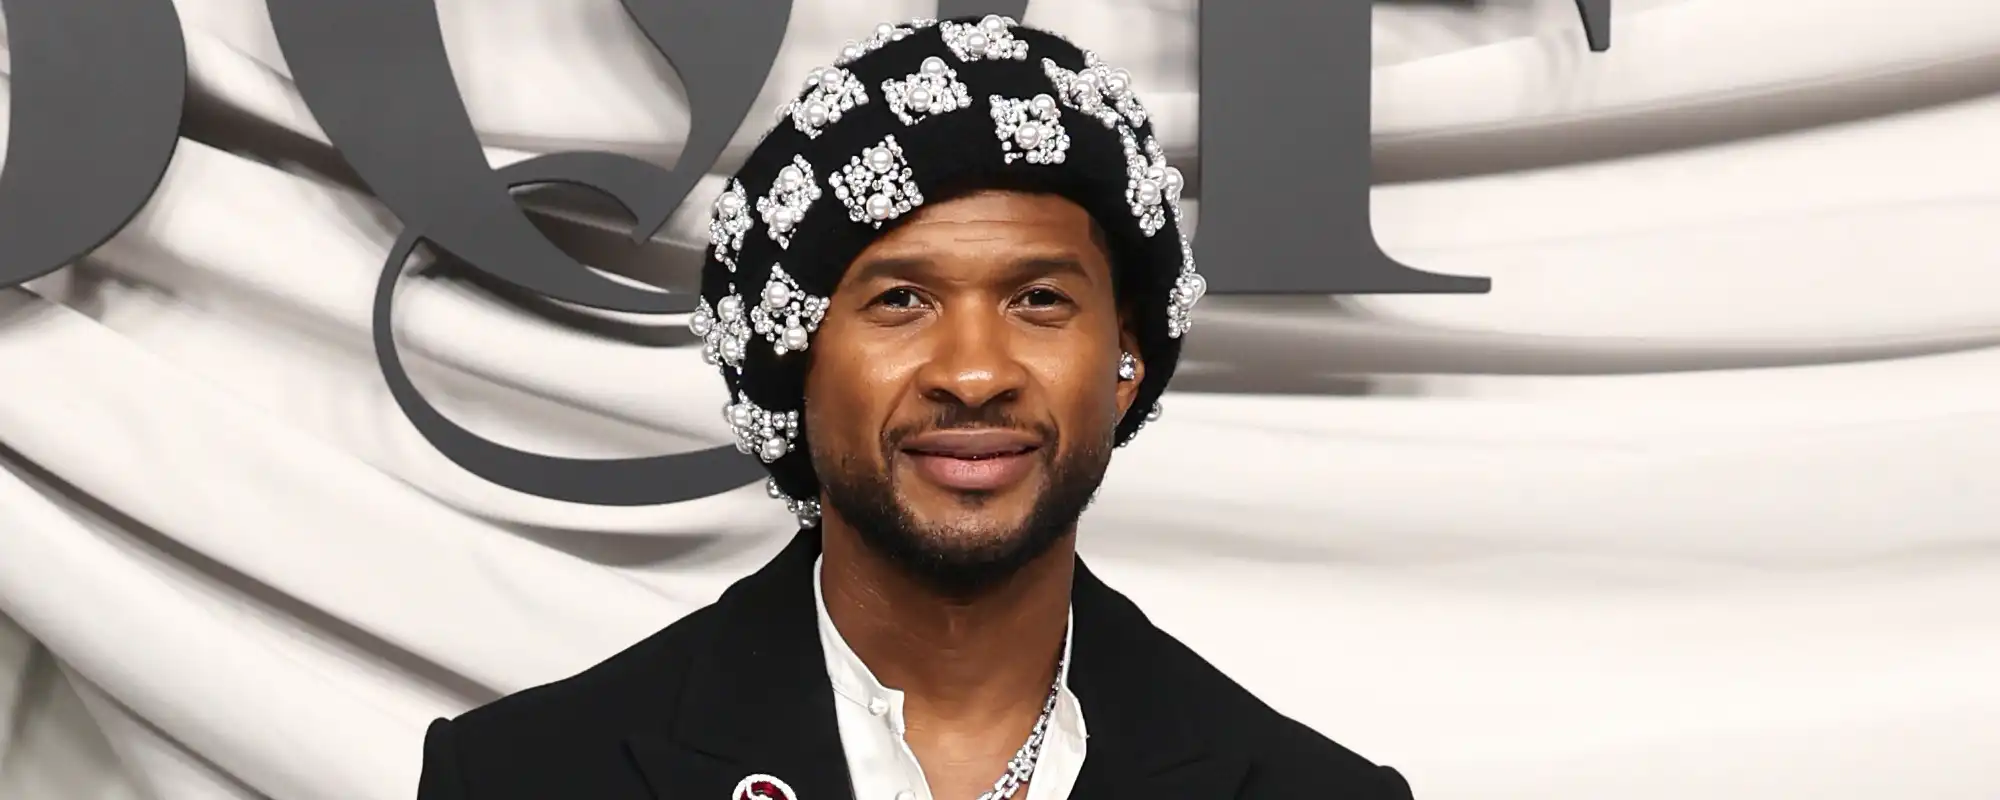 Usher to Perform "Yeah!" With Lil Jon and Ludacris at Super Bowl 2024, Social Media Erupts